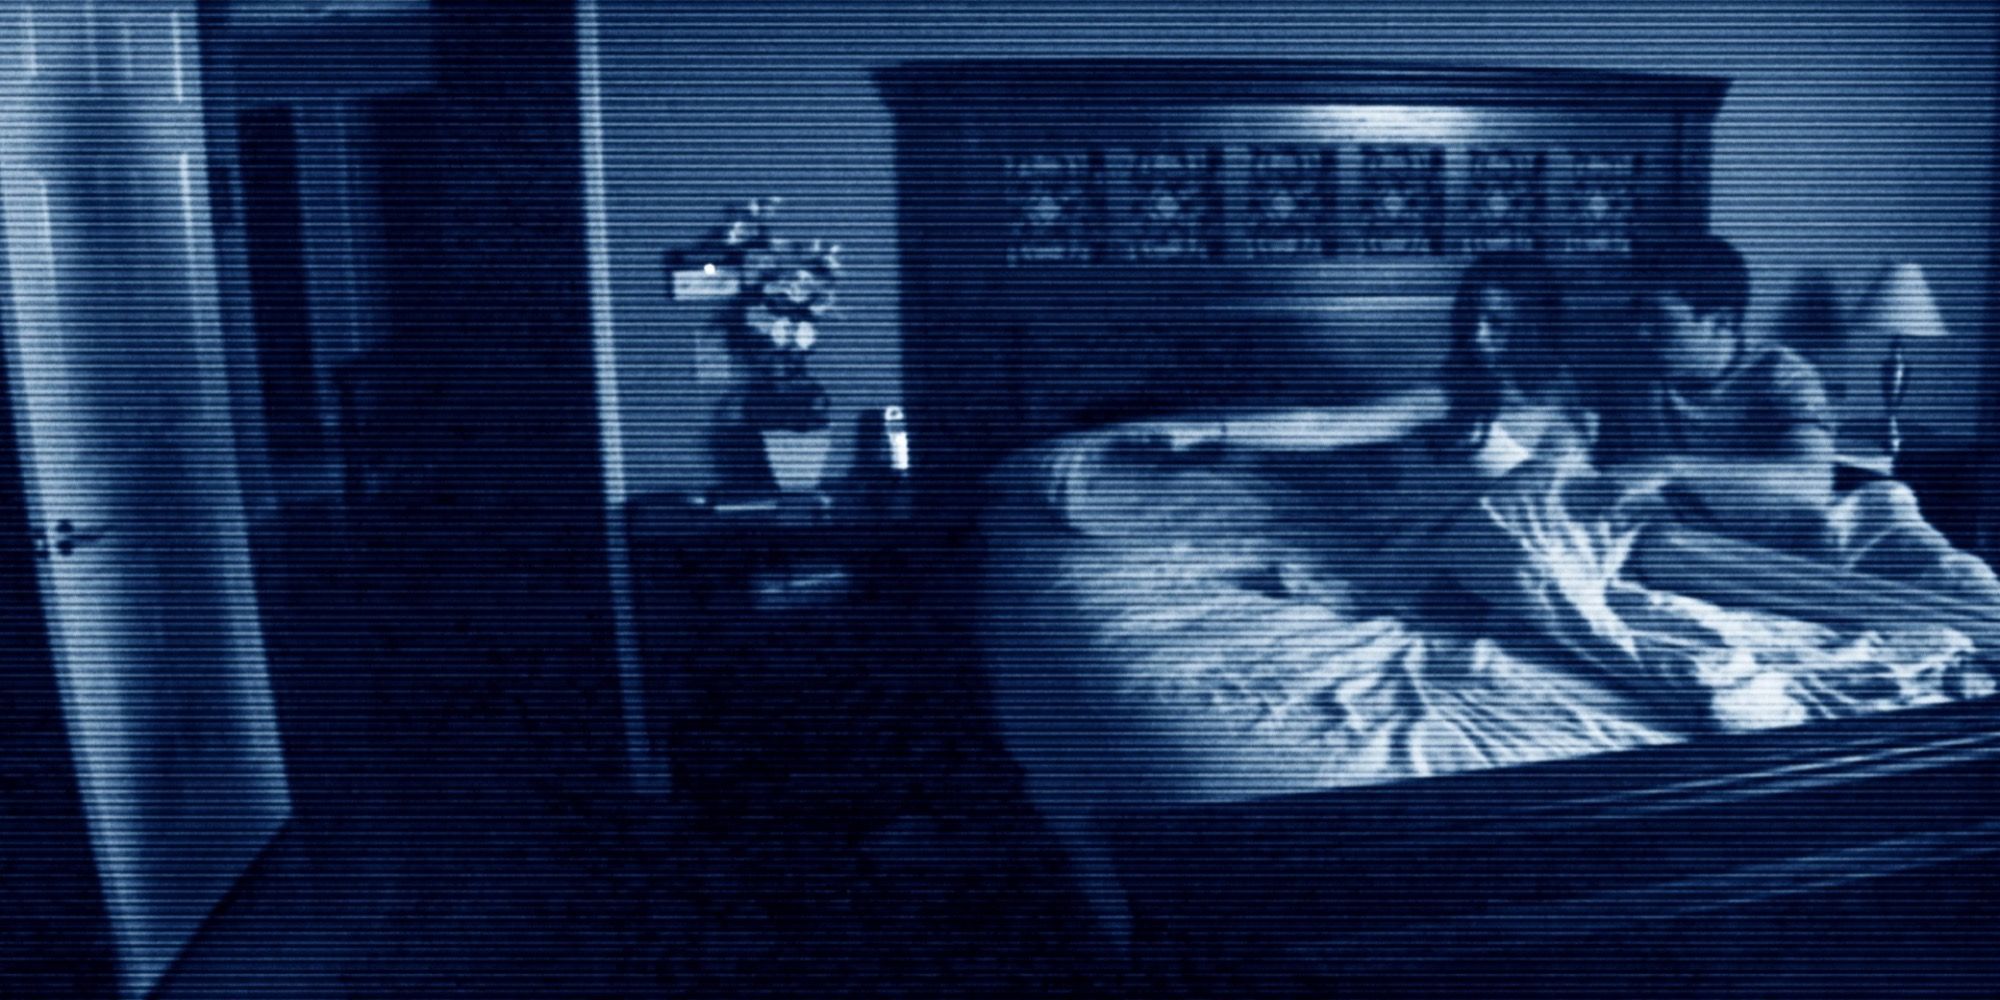 A couple in bed scared by something not visible